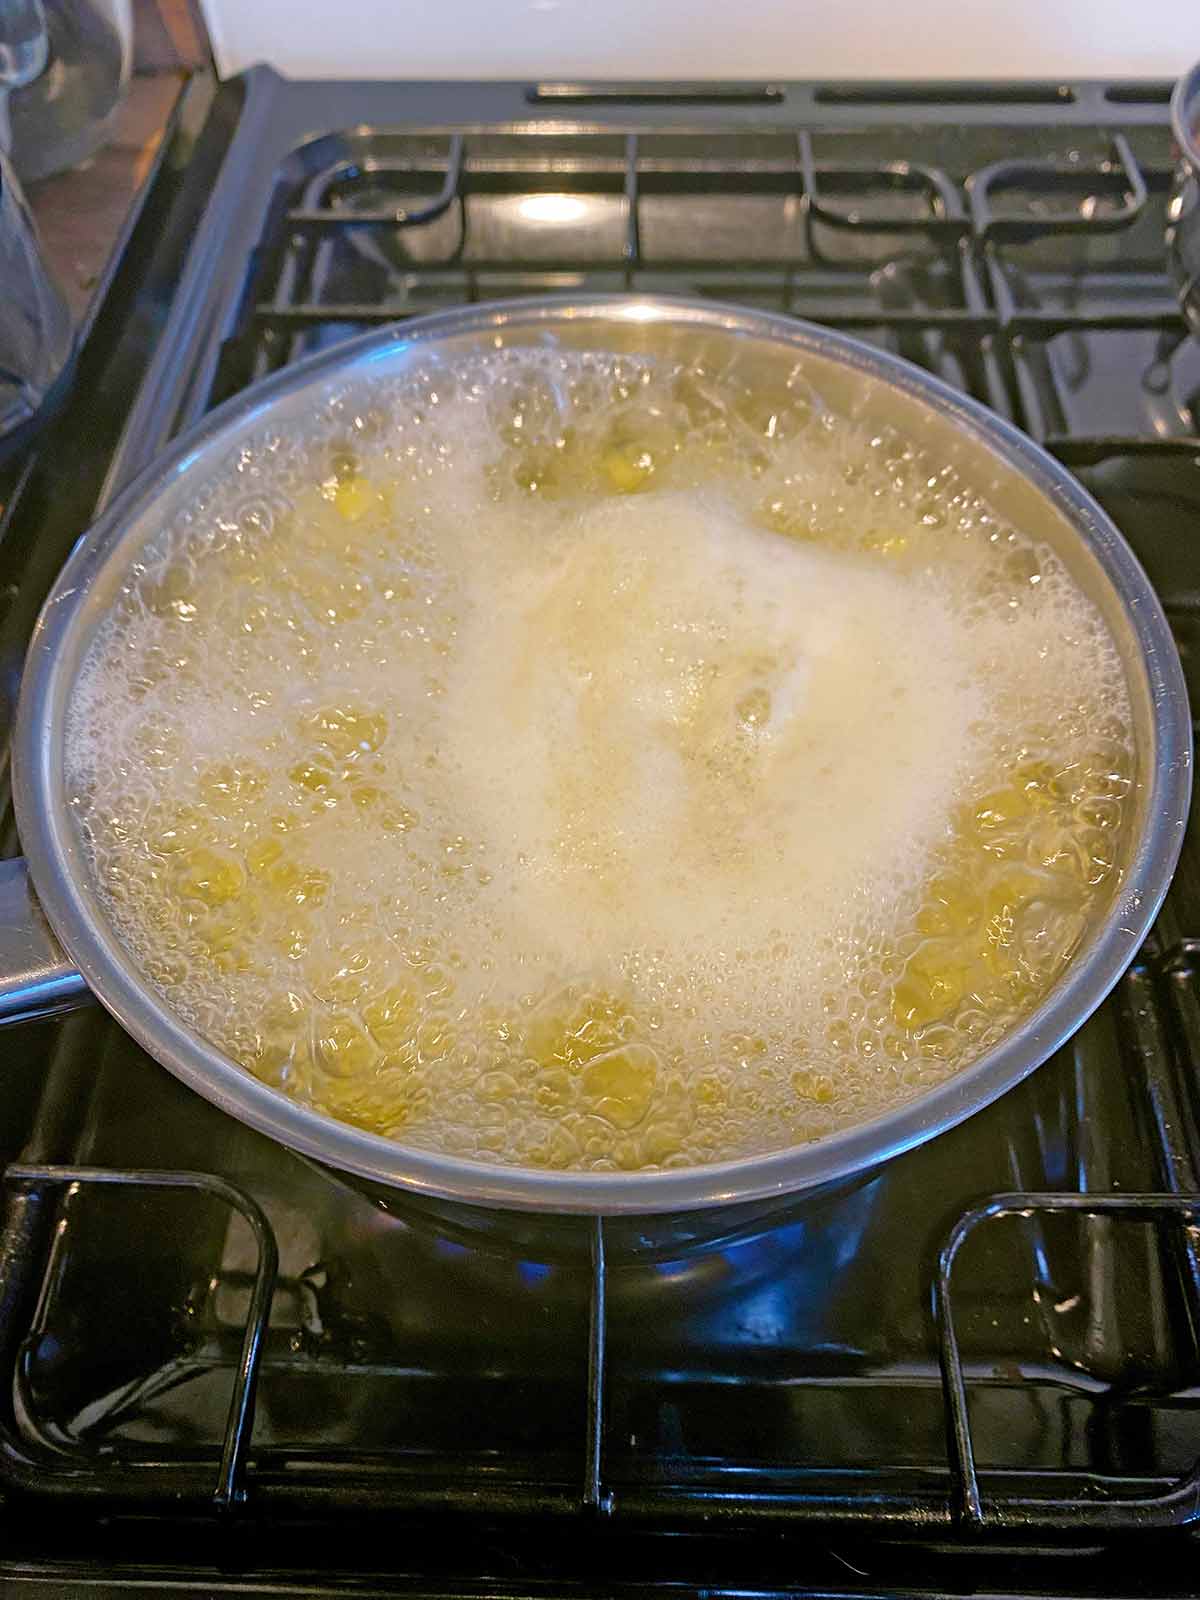 Potatoes boiling in a pan on a hob.